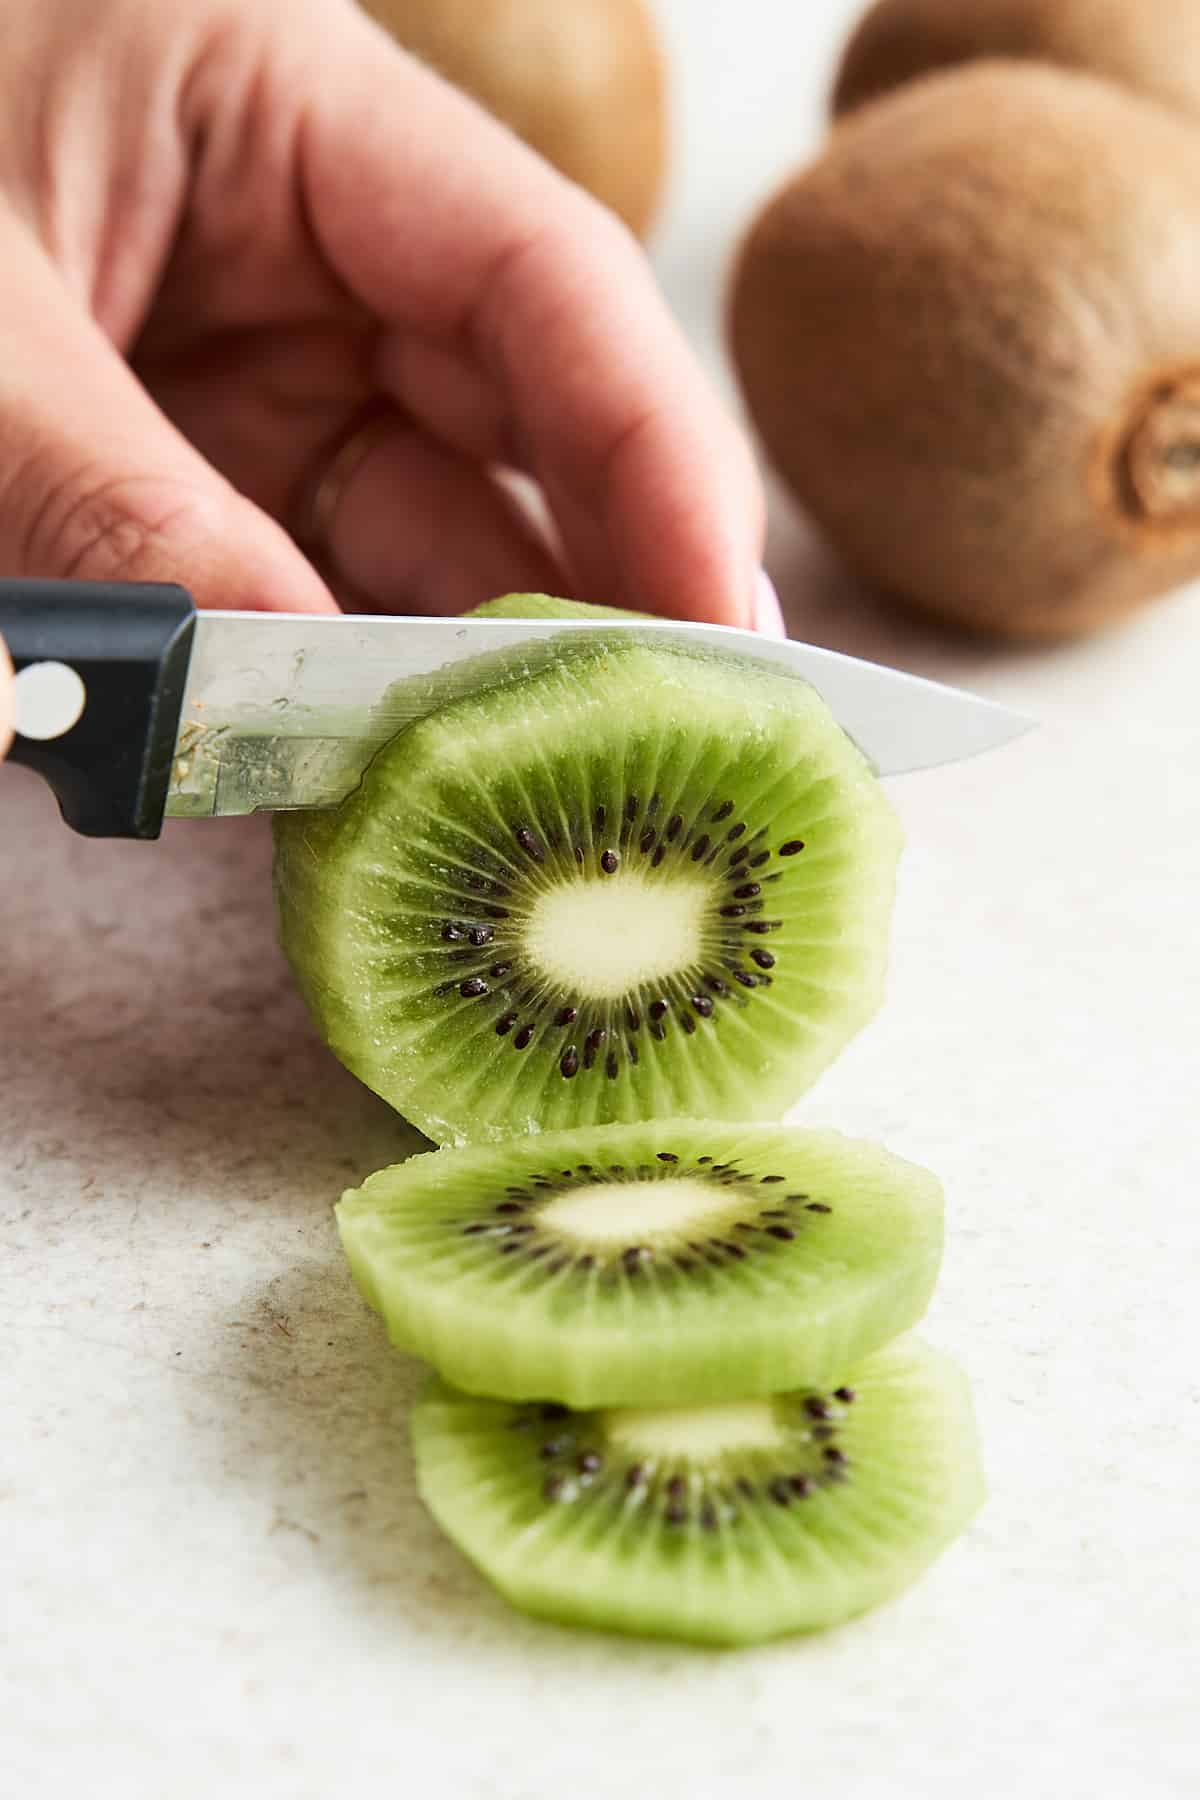 Slicing a kiwi into rounds.